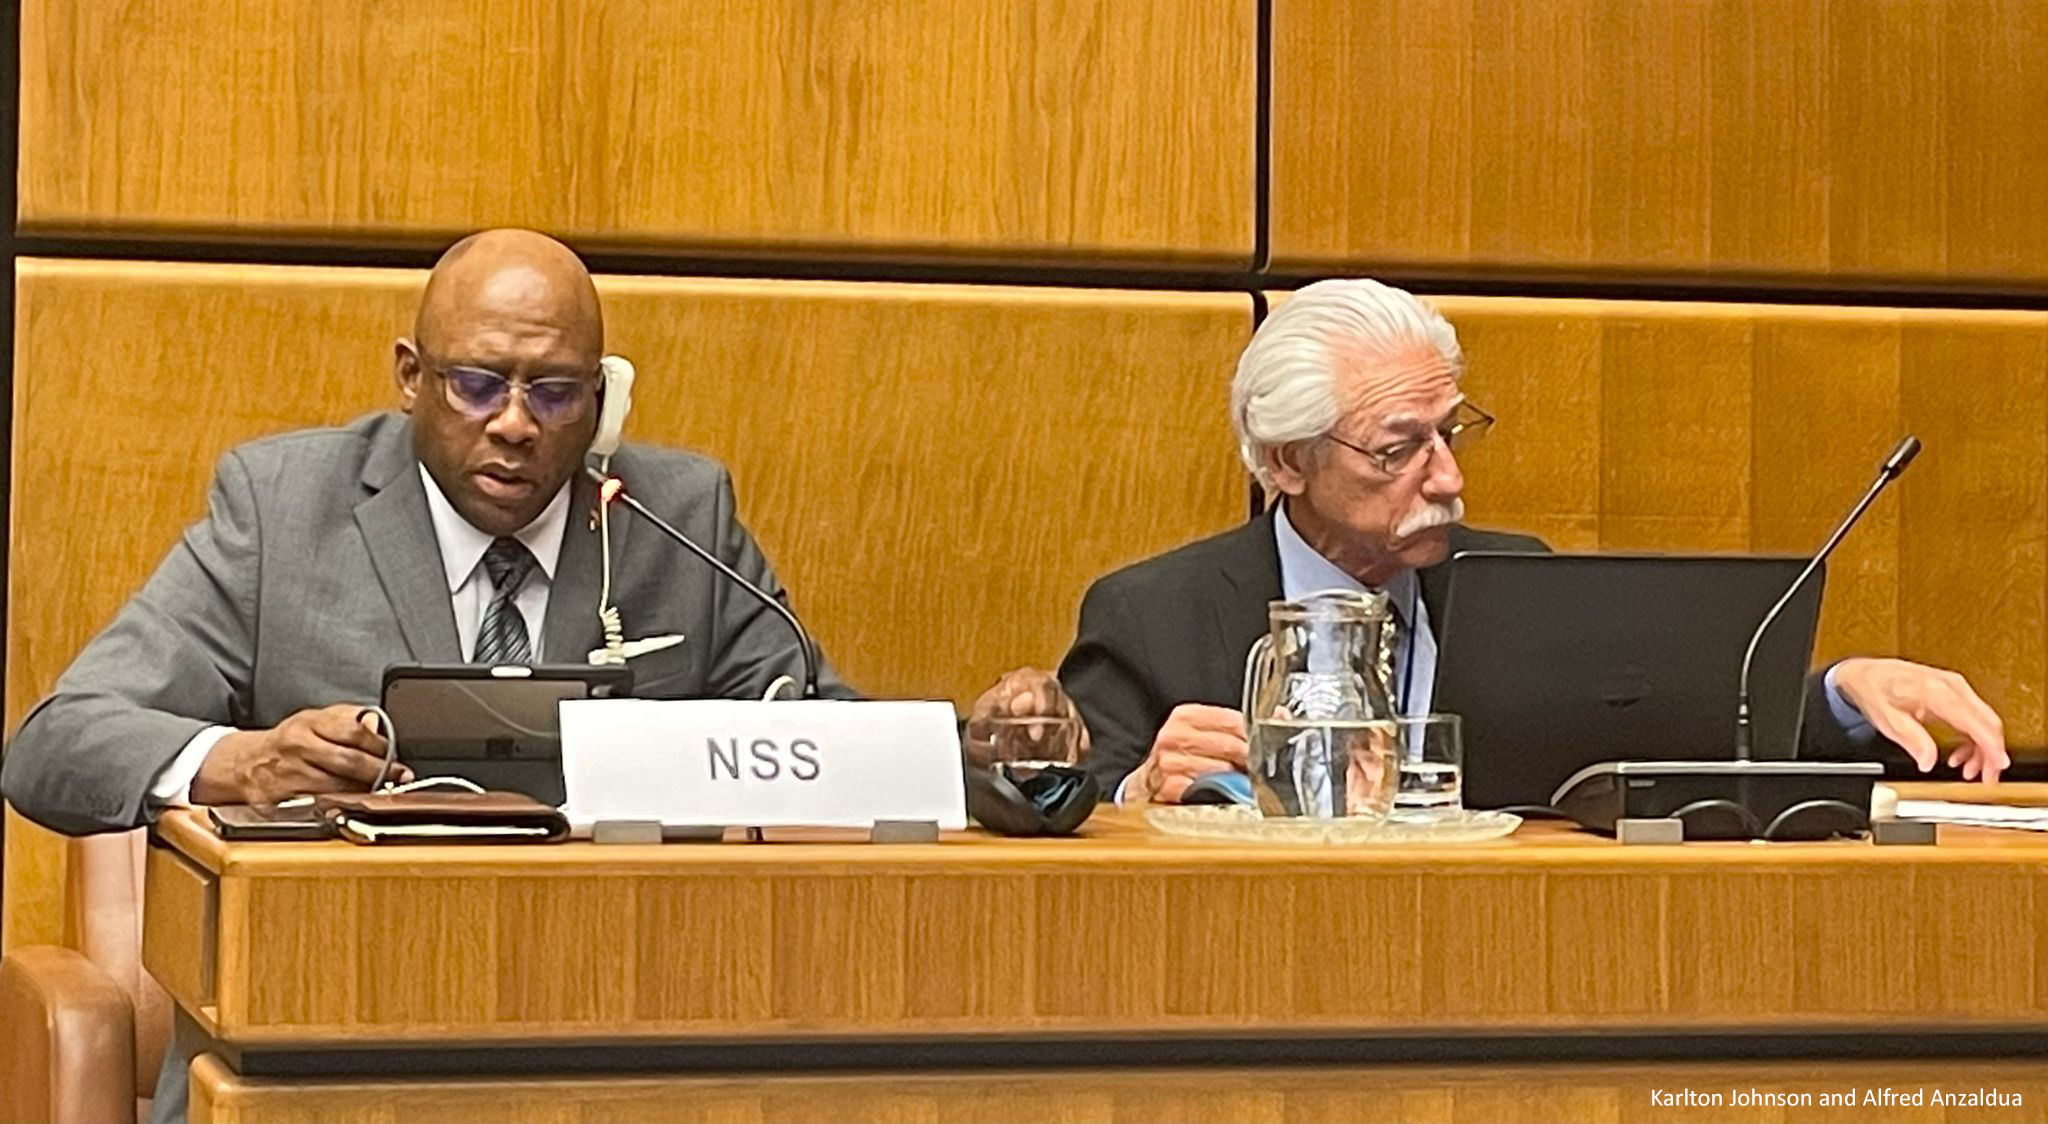 The 18th SDG proposal was announced at COPUOS 66th session, in Wien, the 5 June 2023